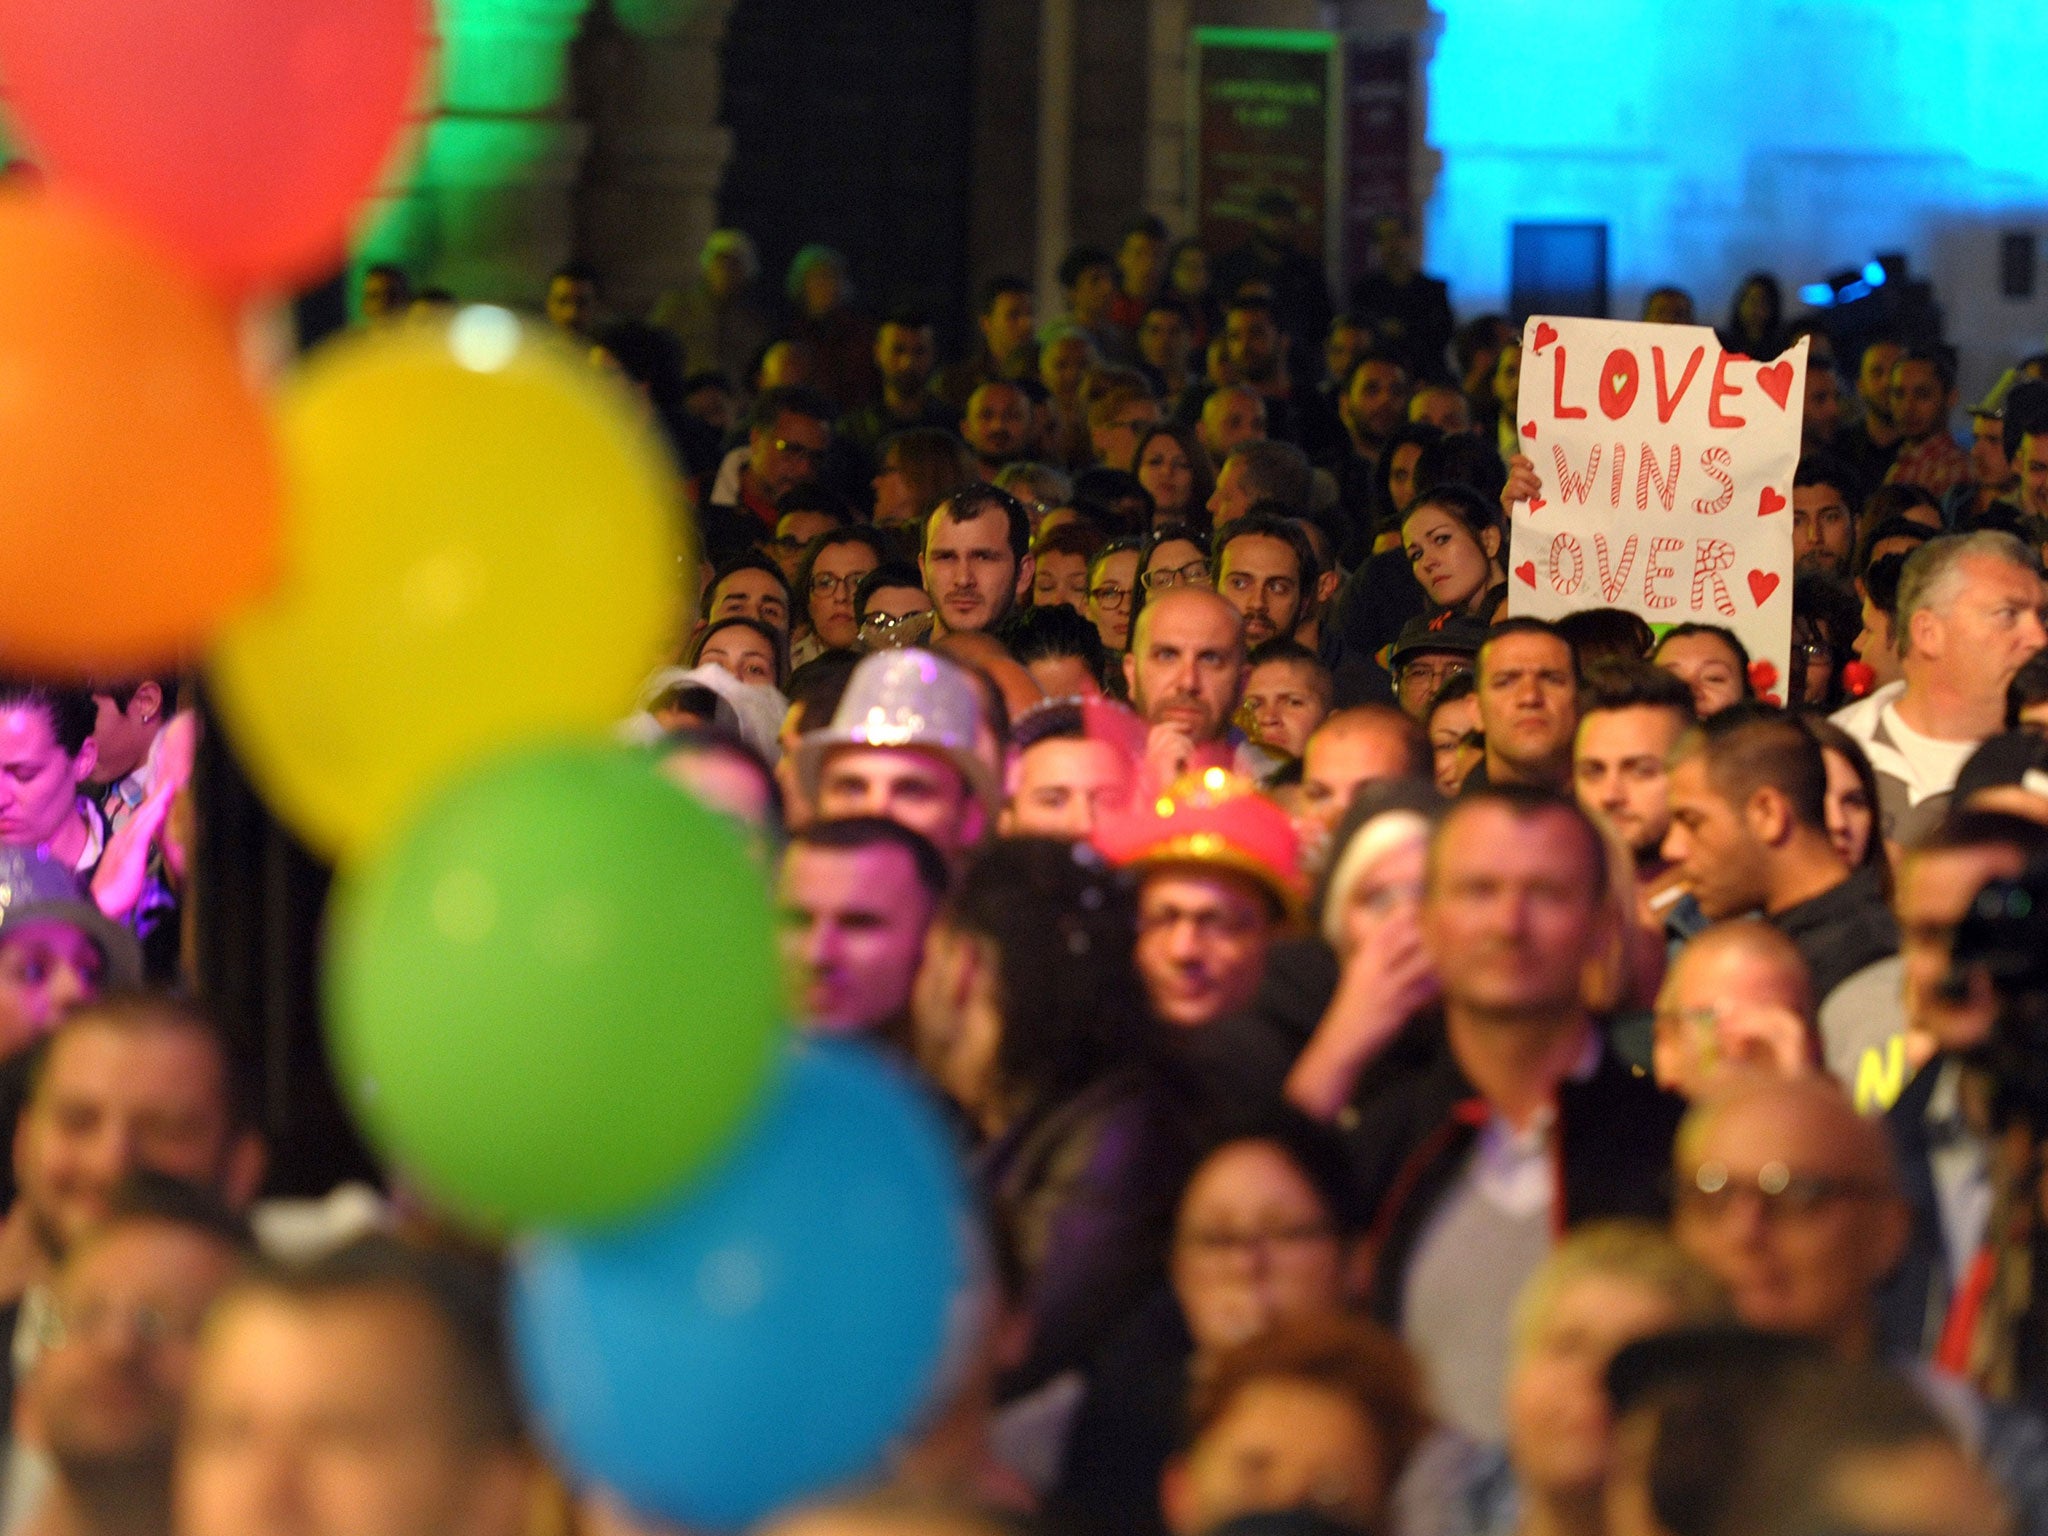 LGBT equality campaigners in Malta last had cause to celebrate in 2014 when the government passed a bill allowing civil unions